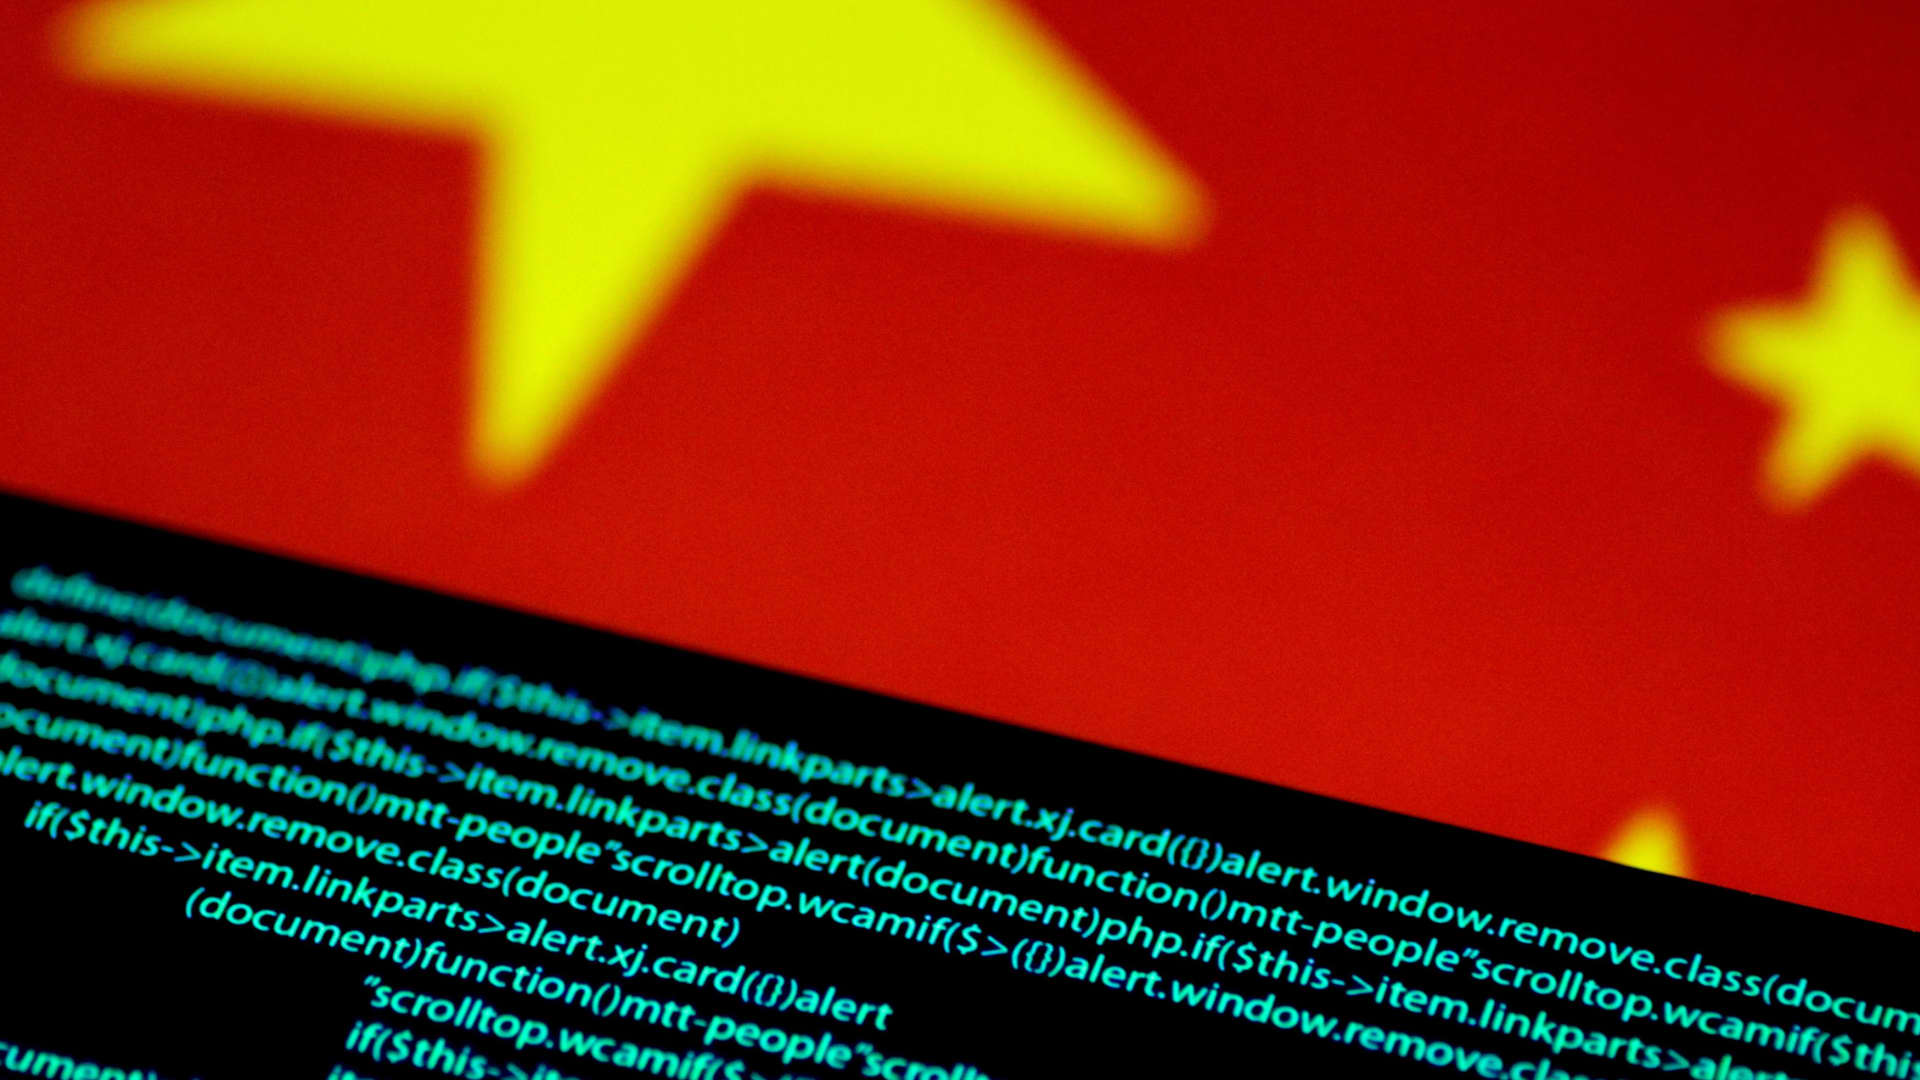 Chinese tech giants share details of their prized algorithms with top regulator ..